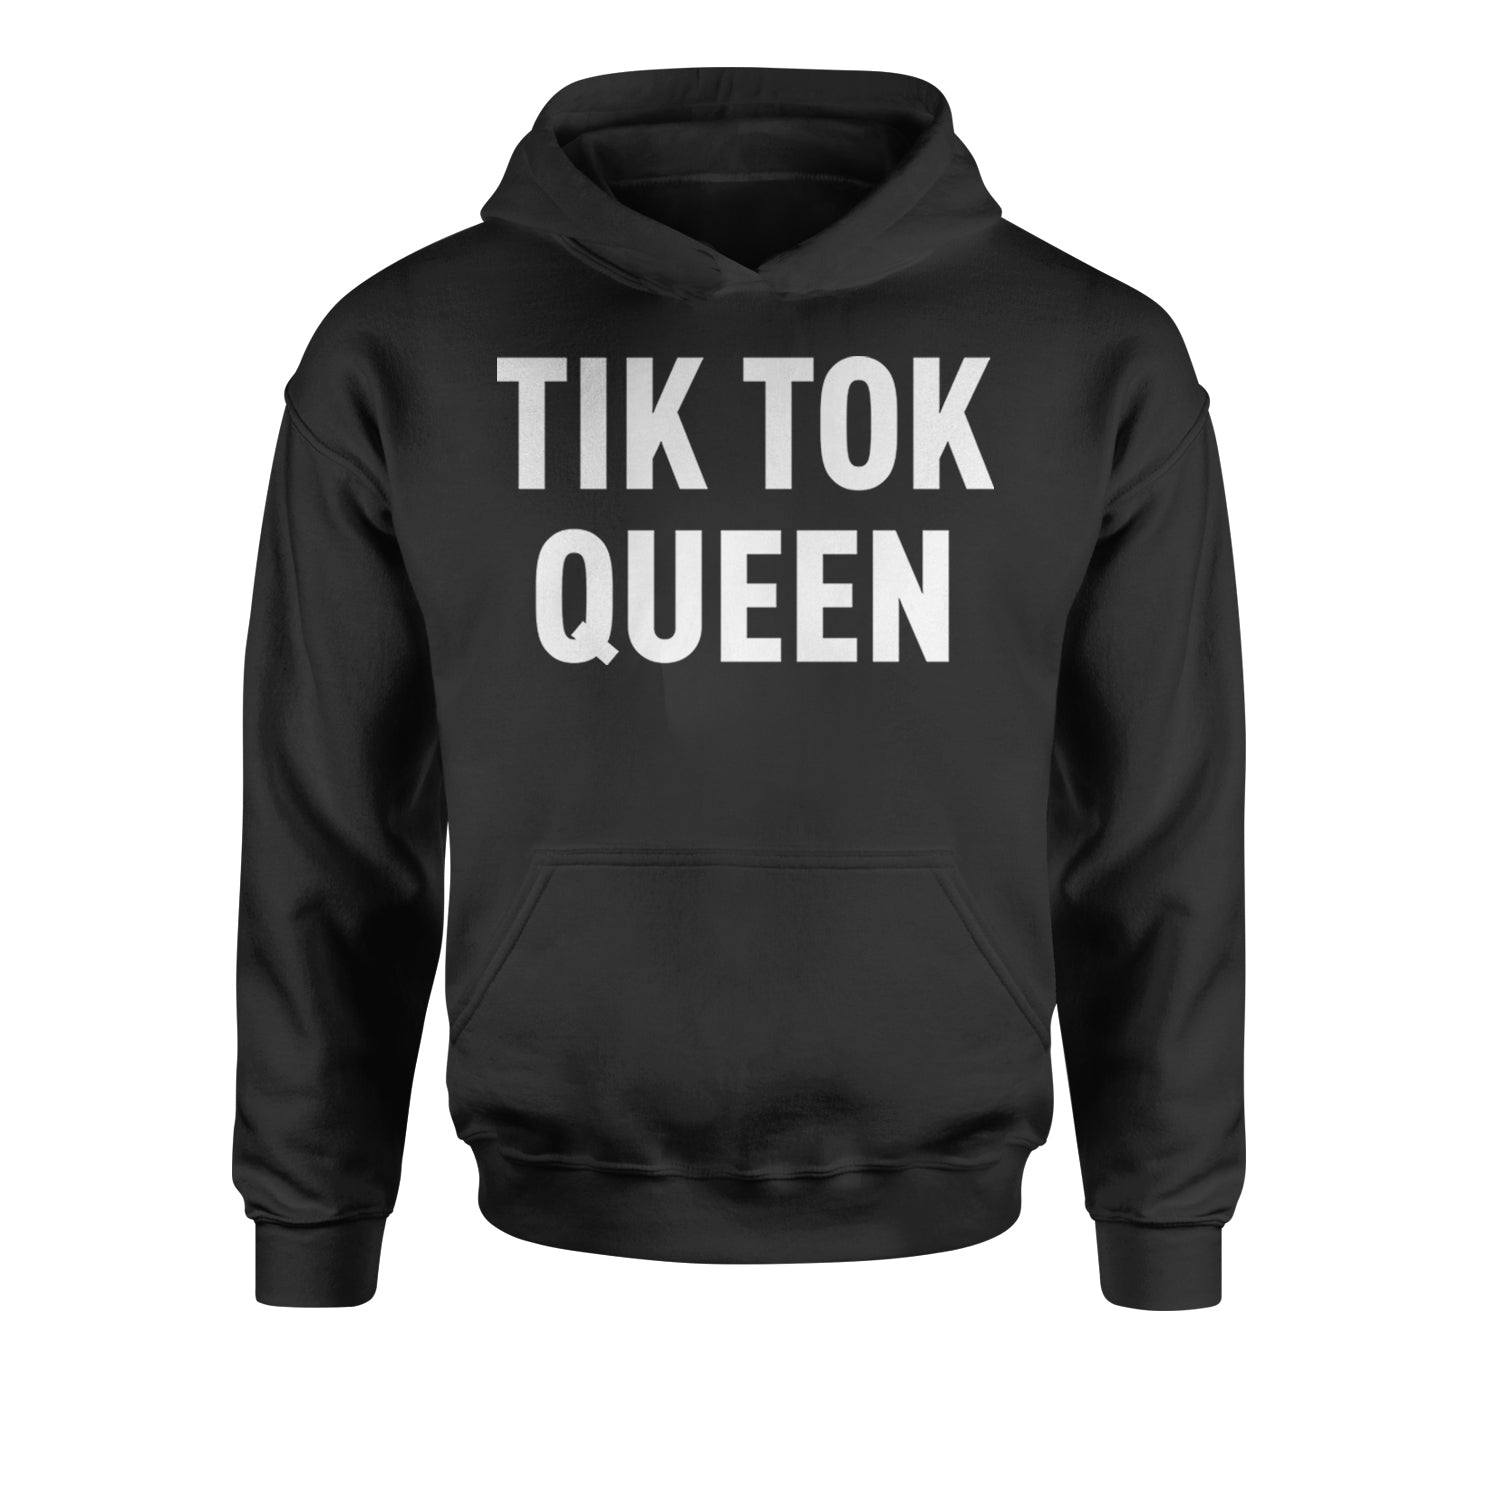 Tik Tok Queen Video Addict Youth-Sized Hoodie